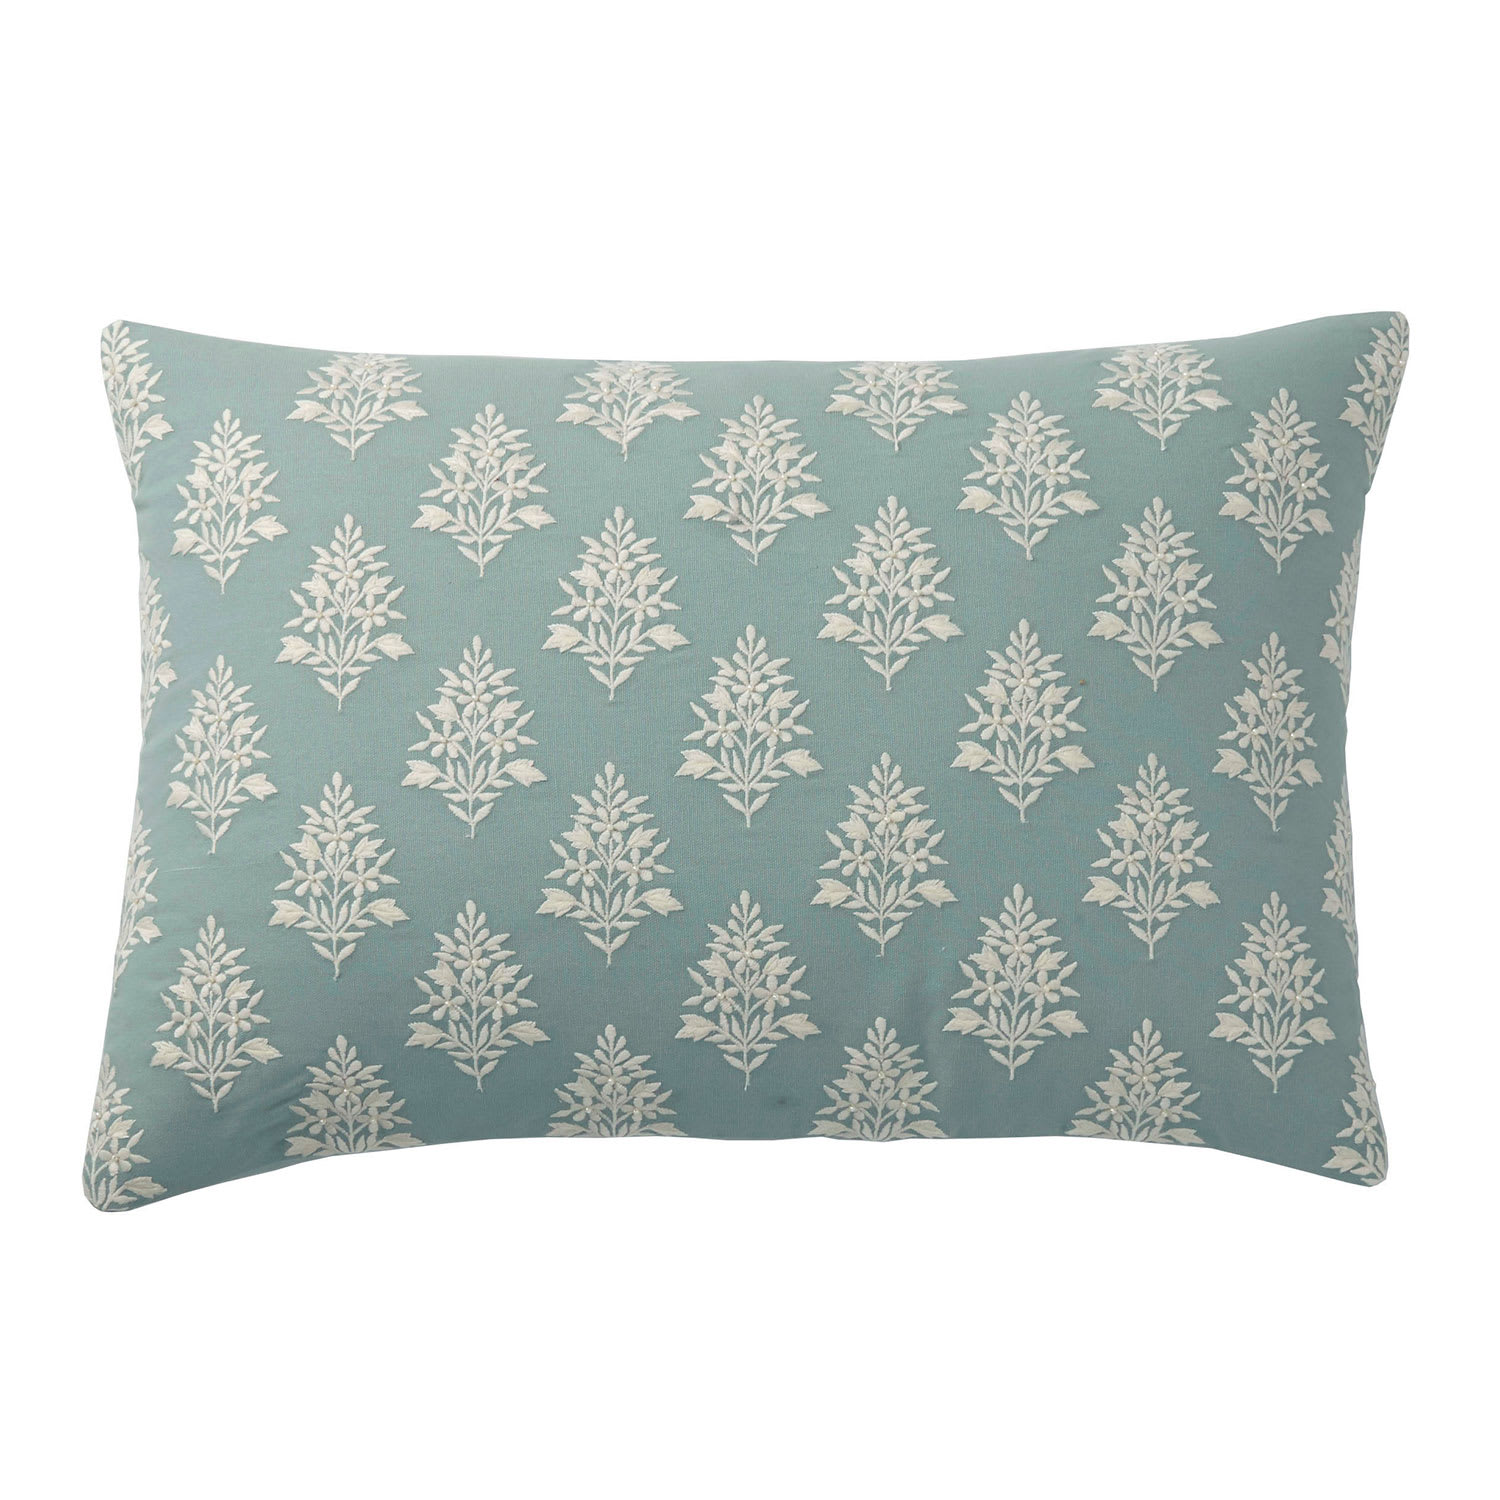 Neutral Foulard Embroidered Pillow Cover - Foulard